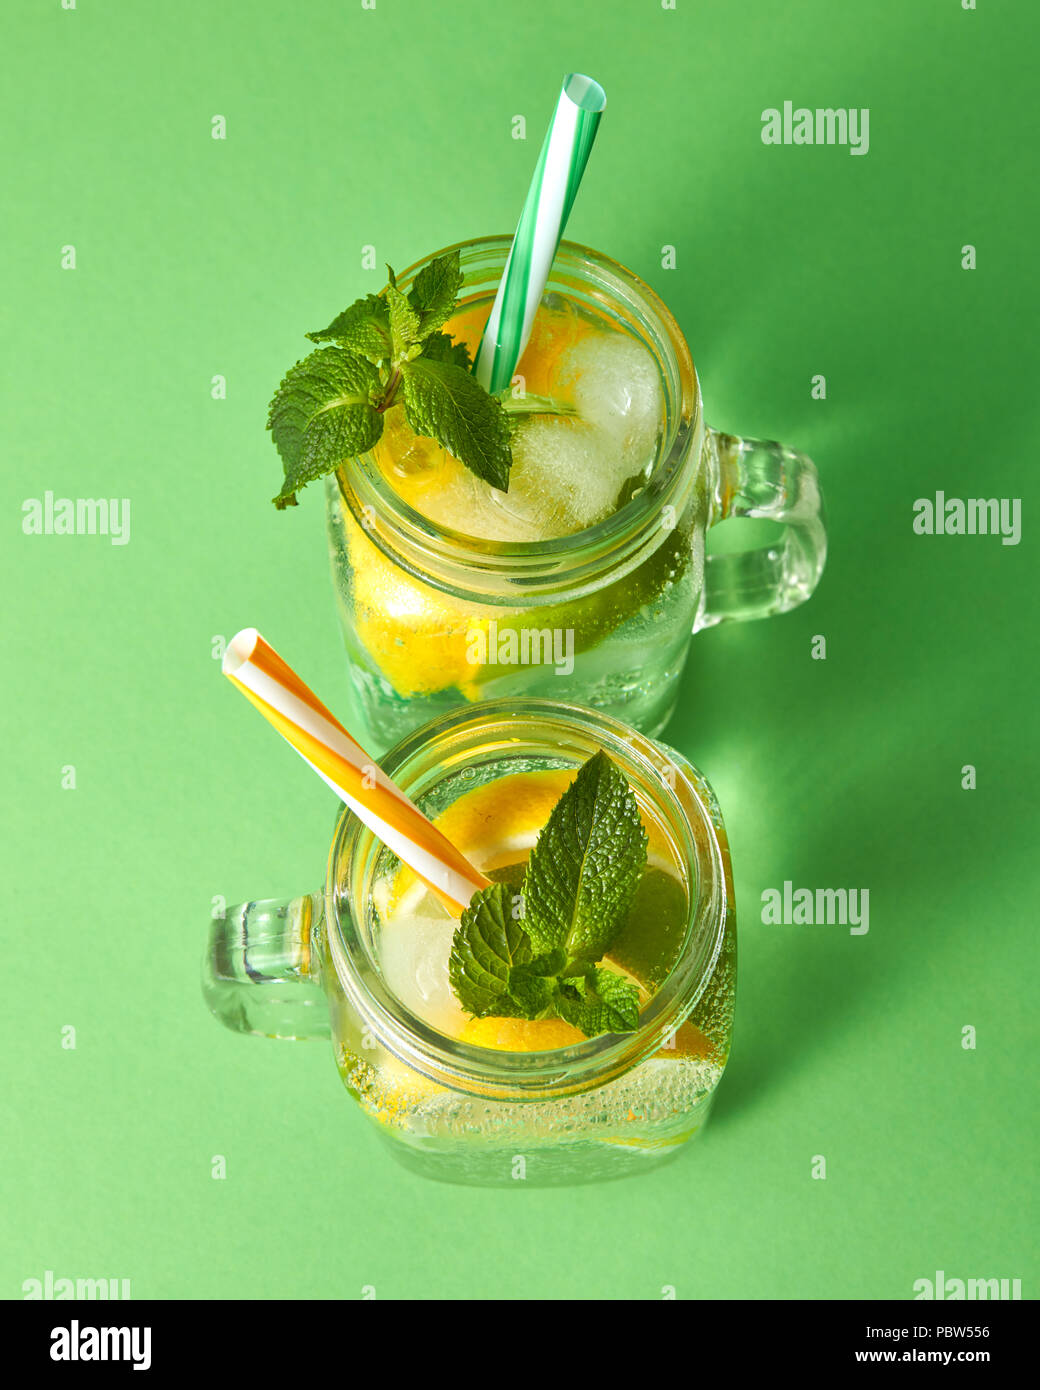 https://c8.alamy.com/comp/PBW556/citrus-fruits-slices-of-lemon-and-lime-ice-water-and-plastic-straws-in-the-glass-on-a-green-background-two-glass-jars-with-a-cold-natural-handmade-lemonade-with-bubbles-of-air-top-view-PBW556.jpg